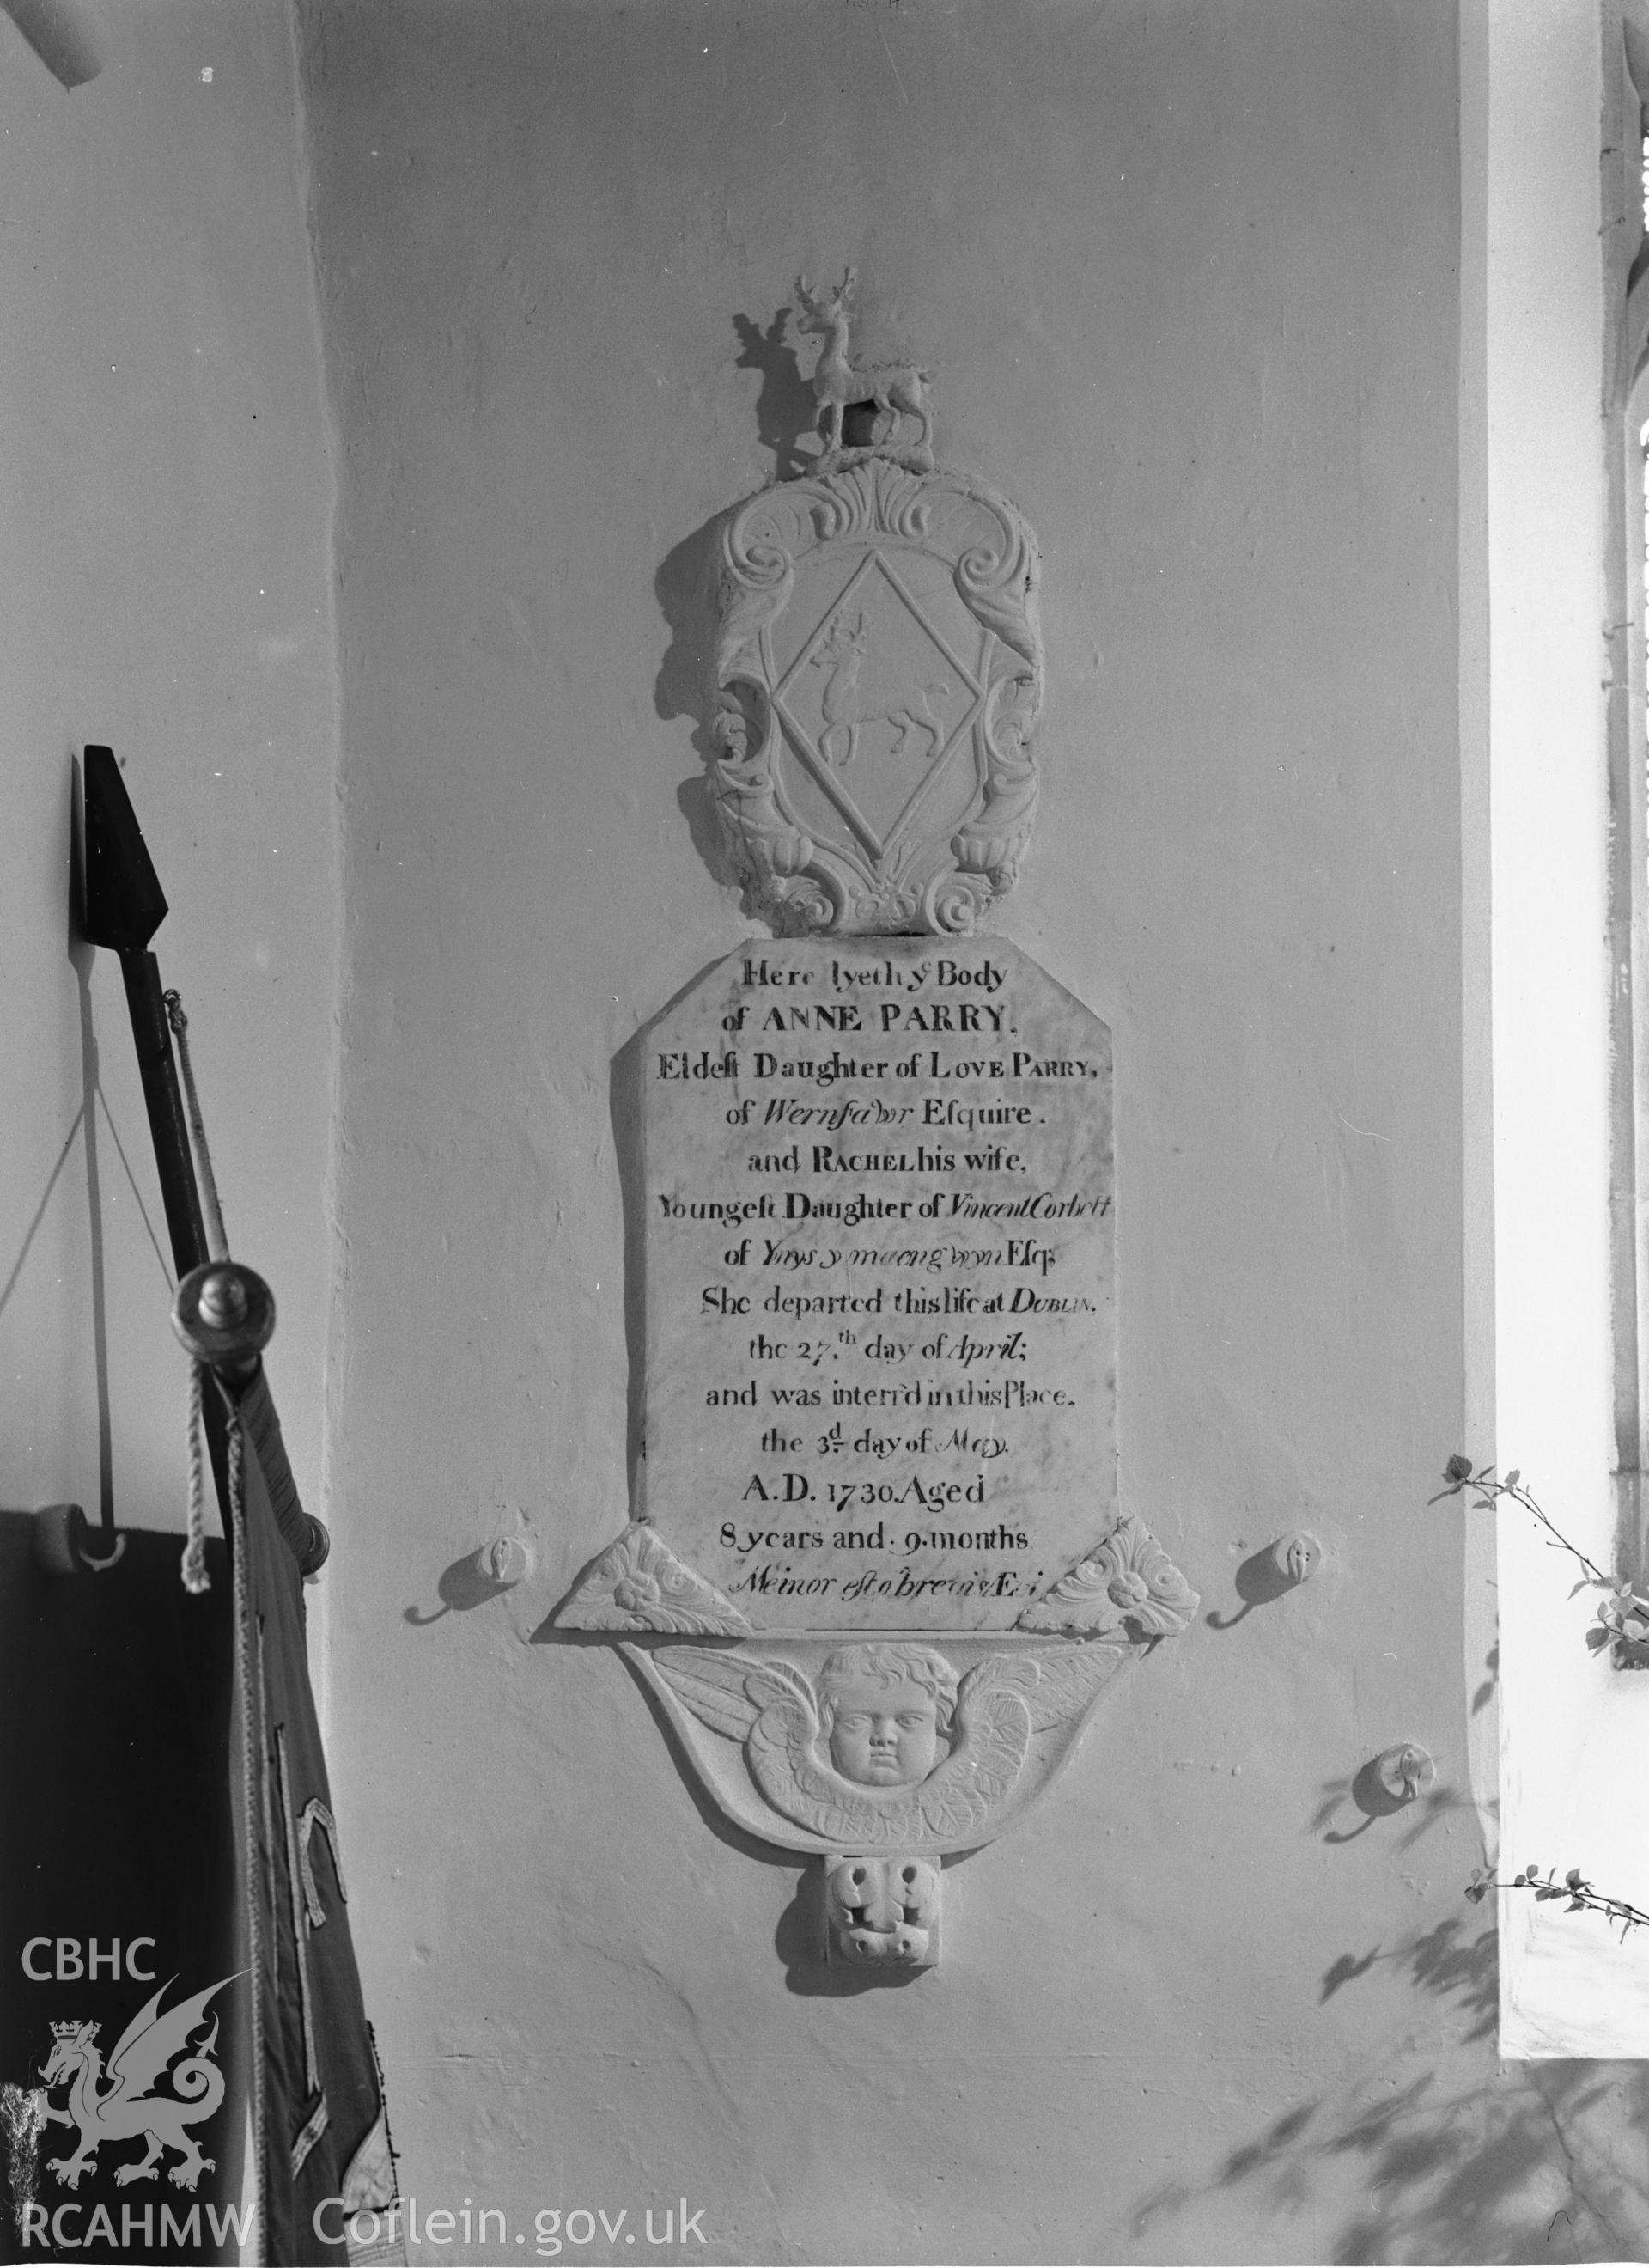 Interior view showing memorial to Anne Parry.